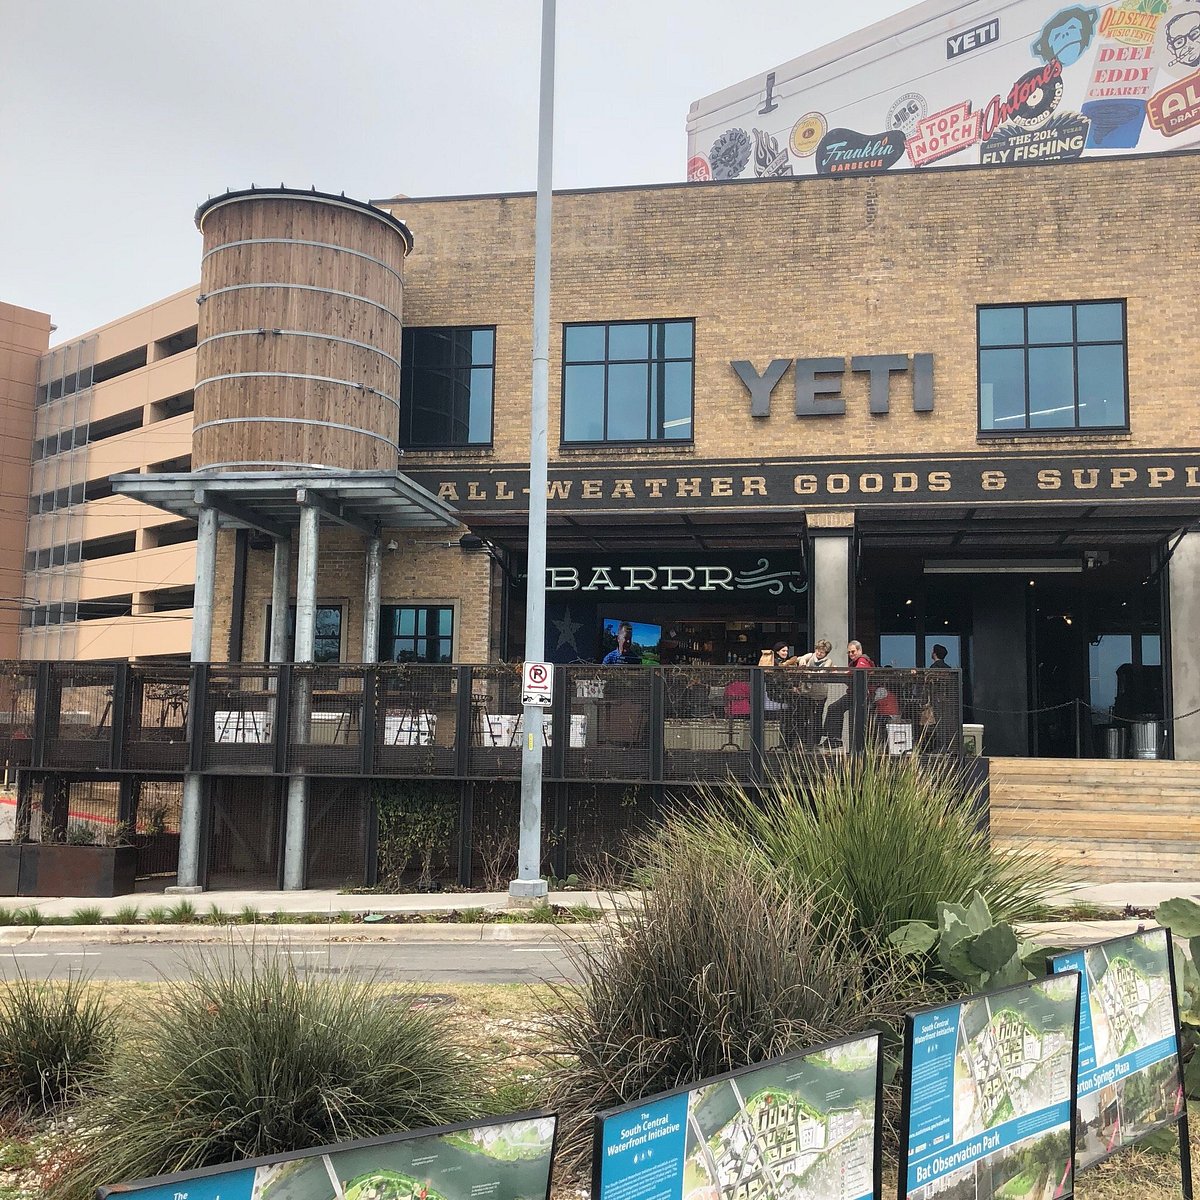 Cult favorite Yeti cools off North Austin with first-ever pop-up